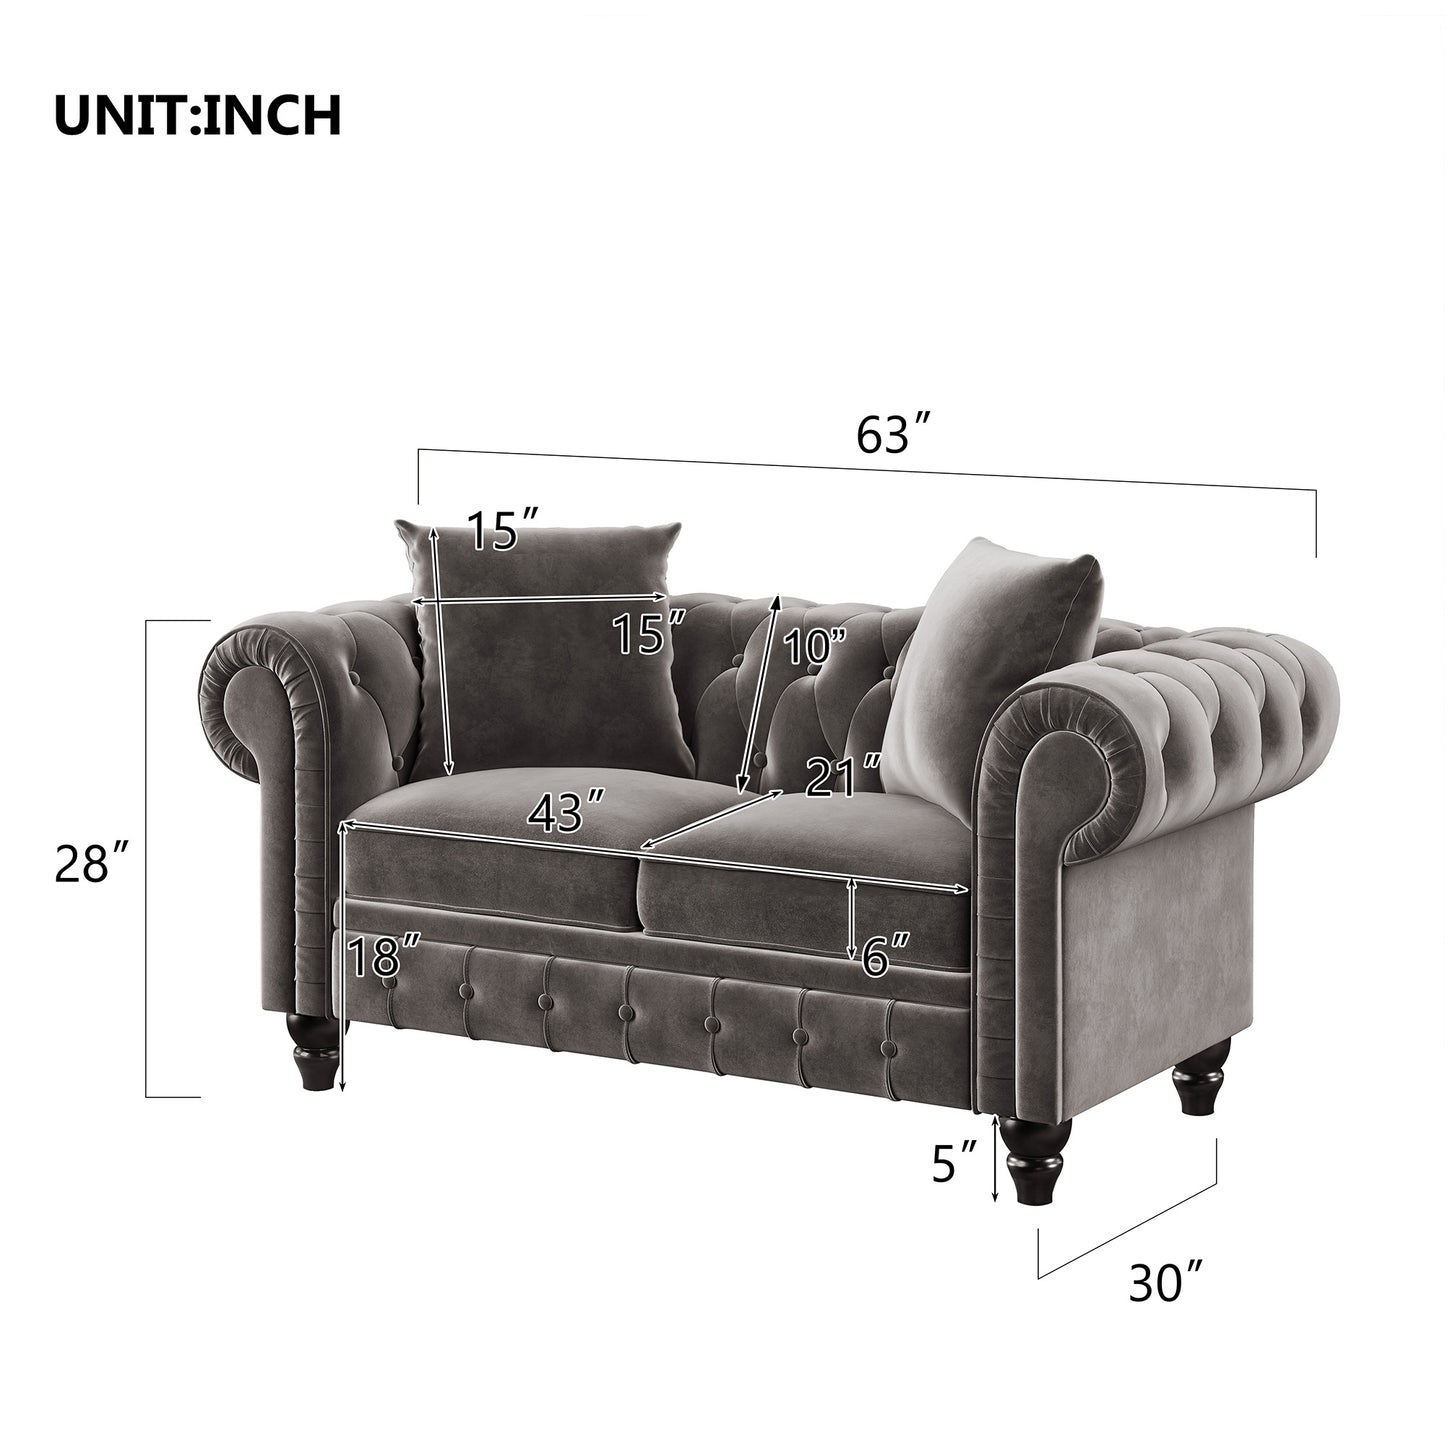 [New] 2 Pieces Chesterfield Sofa Set Button Tufted Velvet Upholstered Low Back Loveseat & 3 Seat Sofa Roll Arm Classic ，5 Pillows included,Wooden Legs